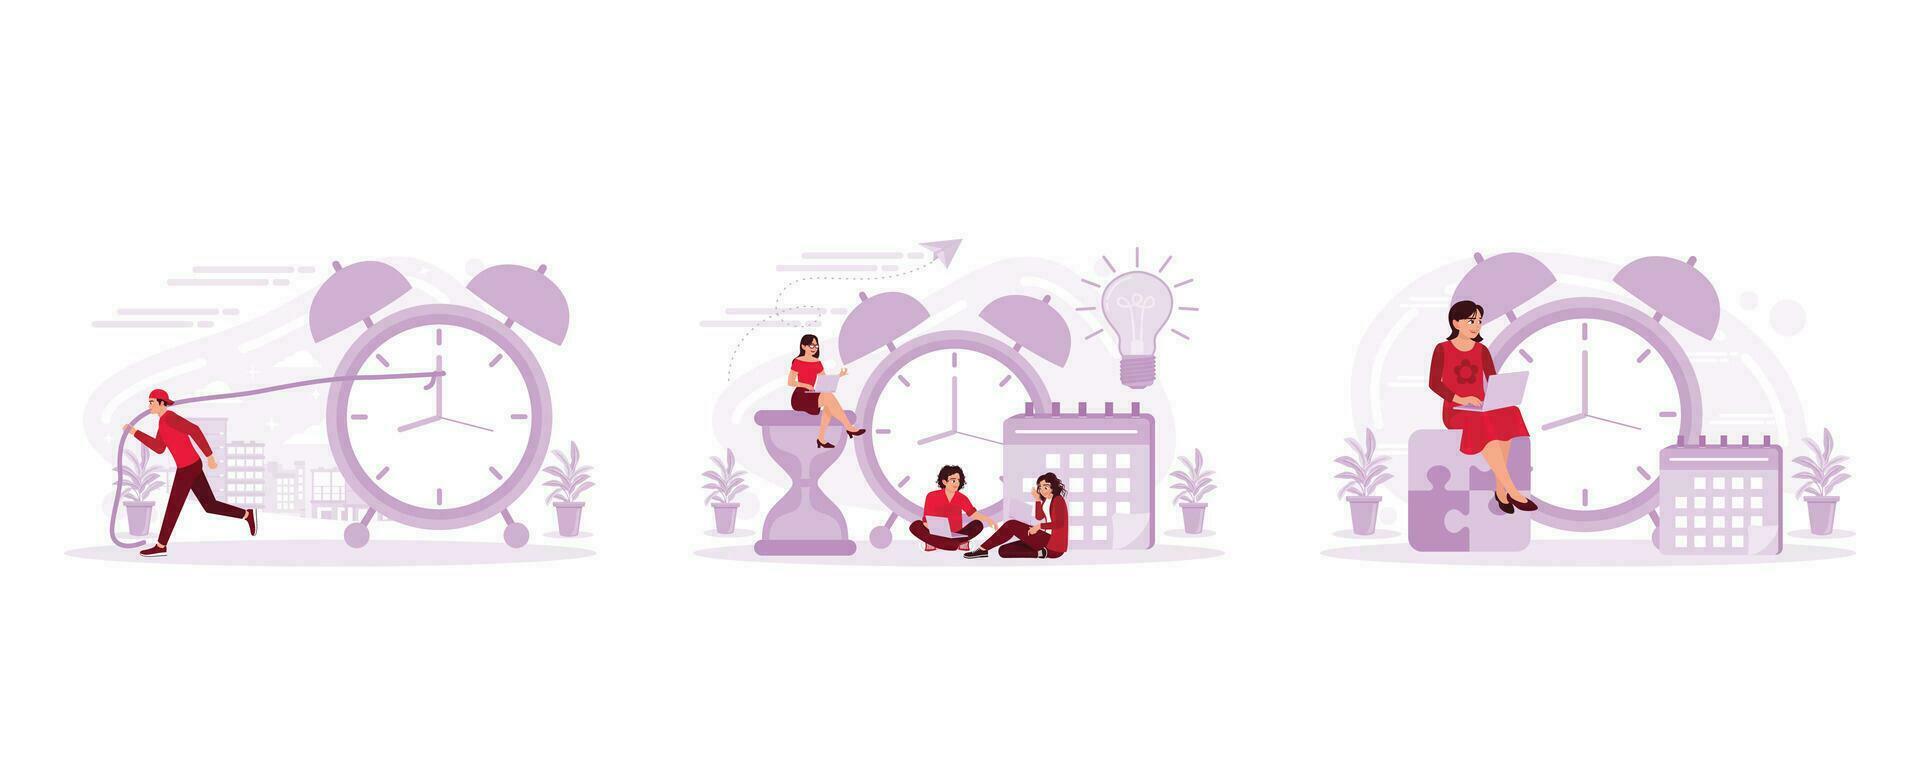 Business people pull the clock in the time management concept, small business people are in front of the watch, calendar, and giant hourglass, and businesswomen relax on the puzzle. vector